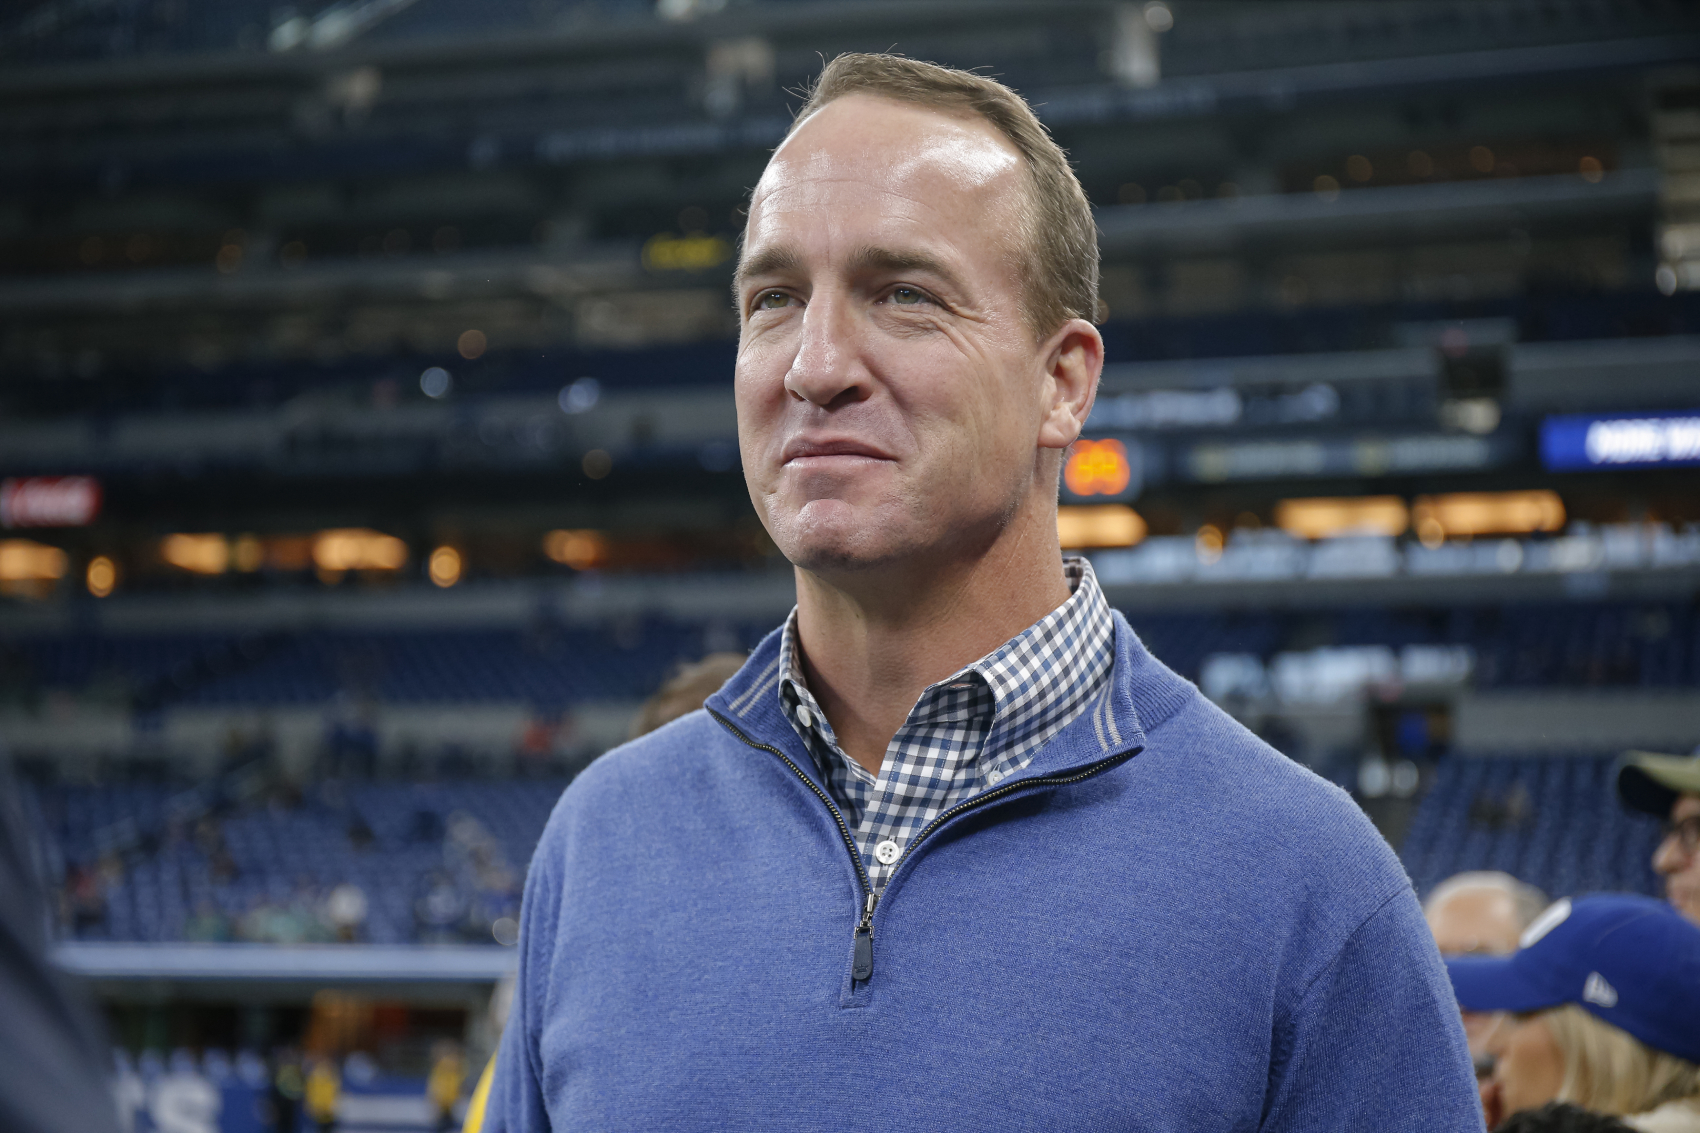 Peyton Manning recently did a Zoom call with the Denver Nuggets, and he reportedly took a massive shot at an NFL team and its fan base.